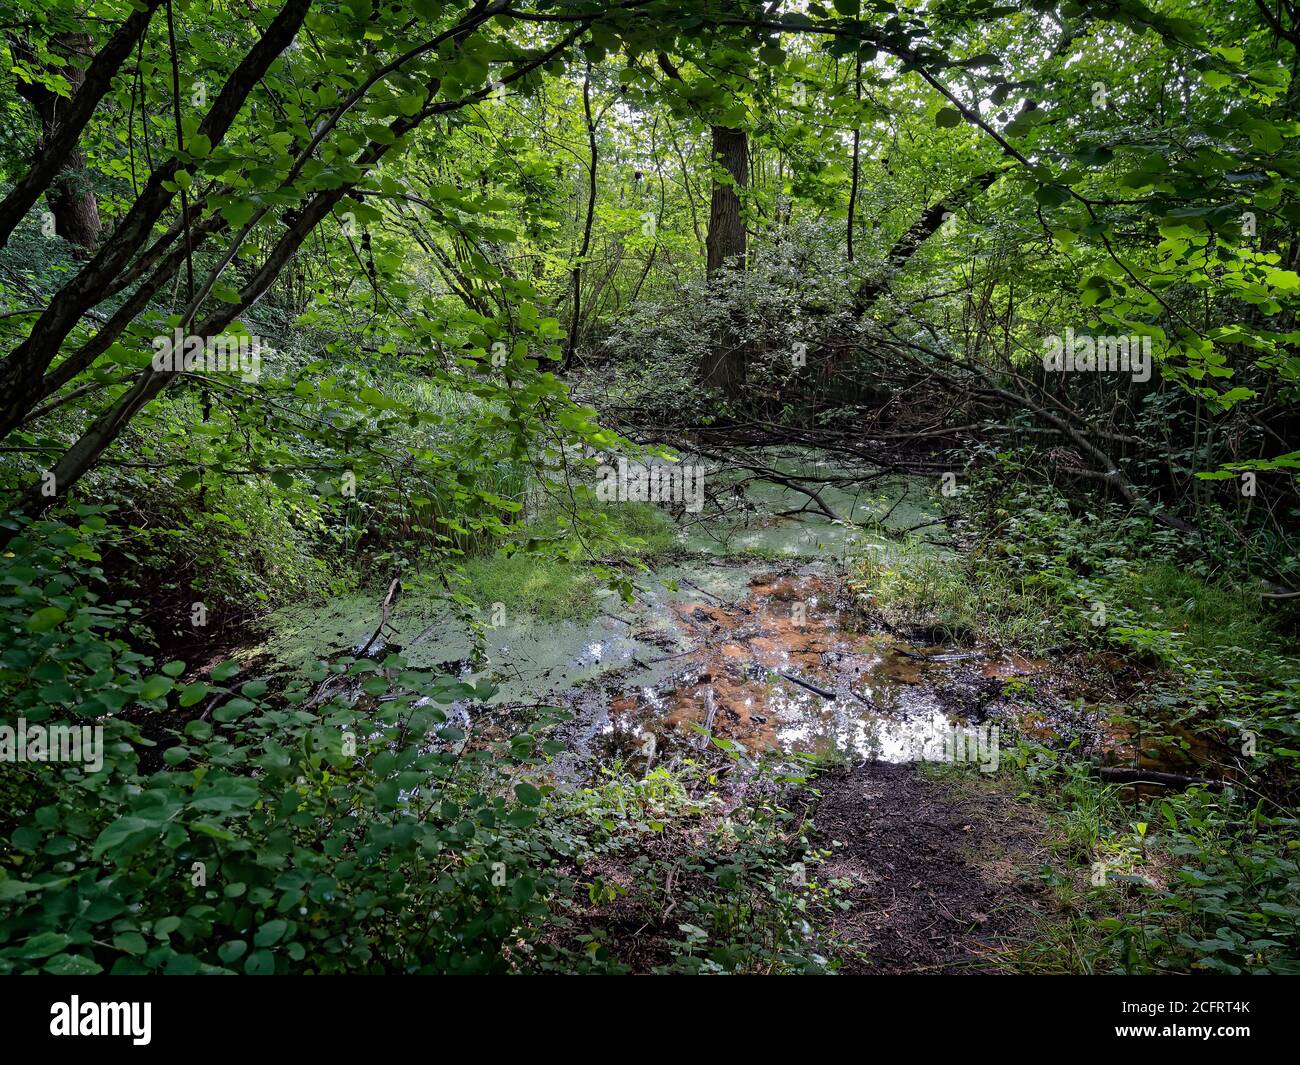 Natural source well in Padborg forest at Gendarmstien, Stock Photo - Alamy